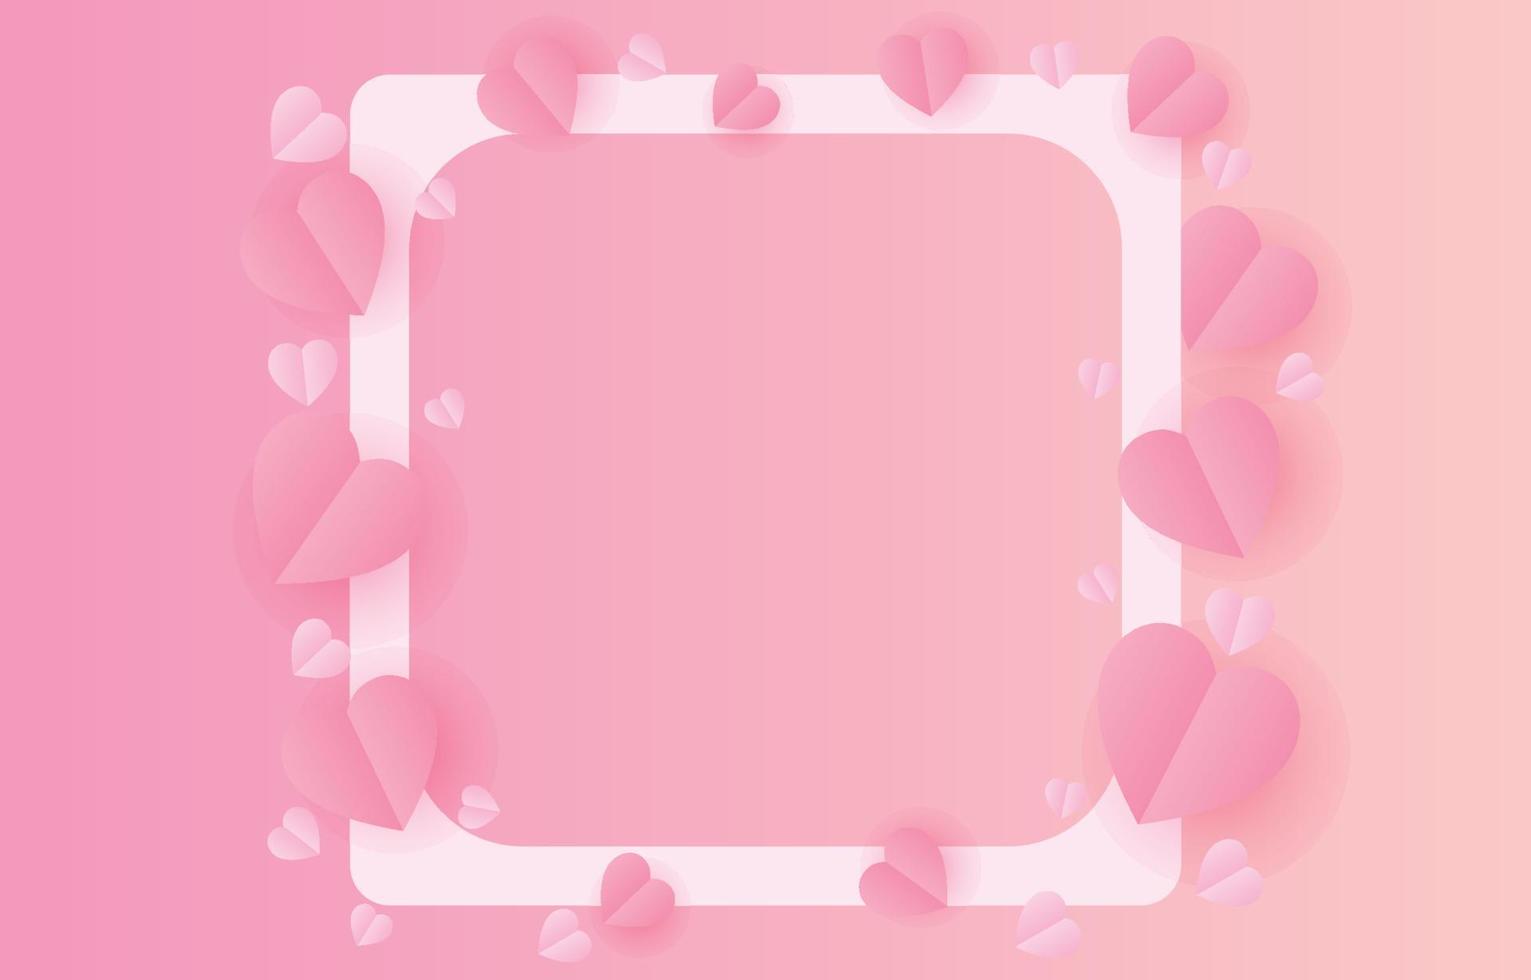 paper cut elements in shape of heart on rectangular frame has free space.and pink sweet background. Vector symbols of love for Happy Valentine's Day, birthday greeting card design.